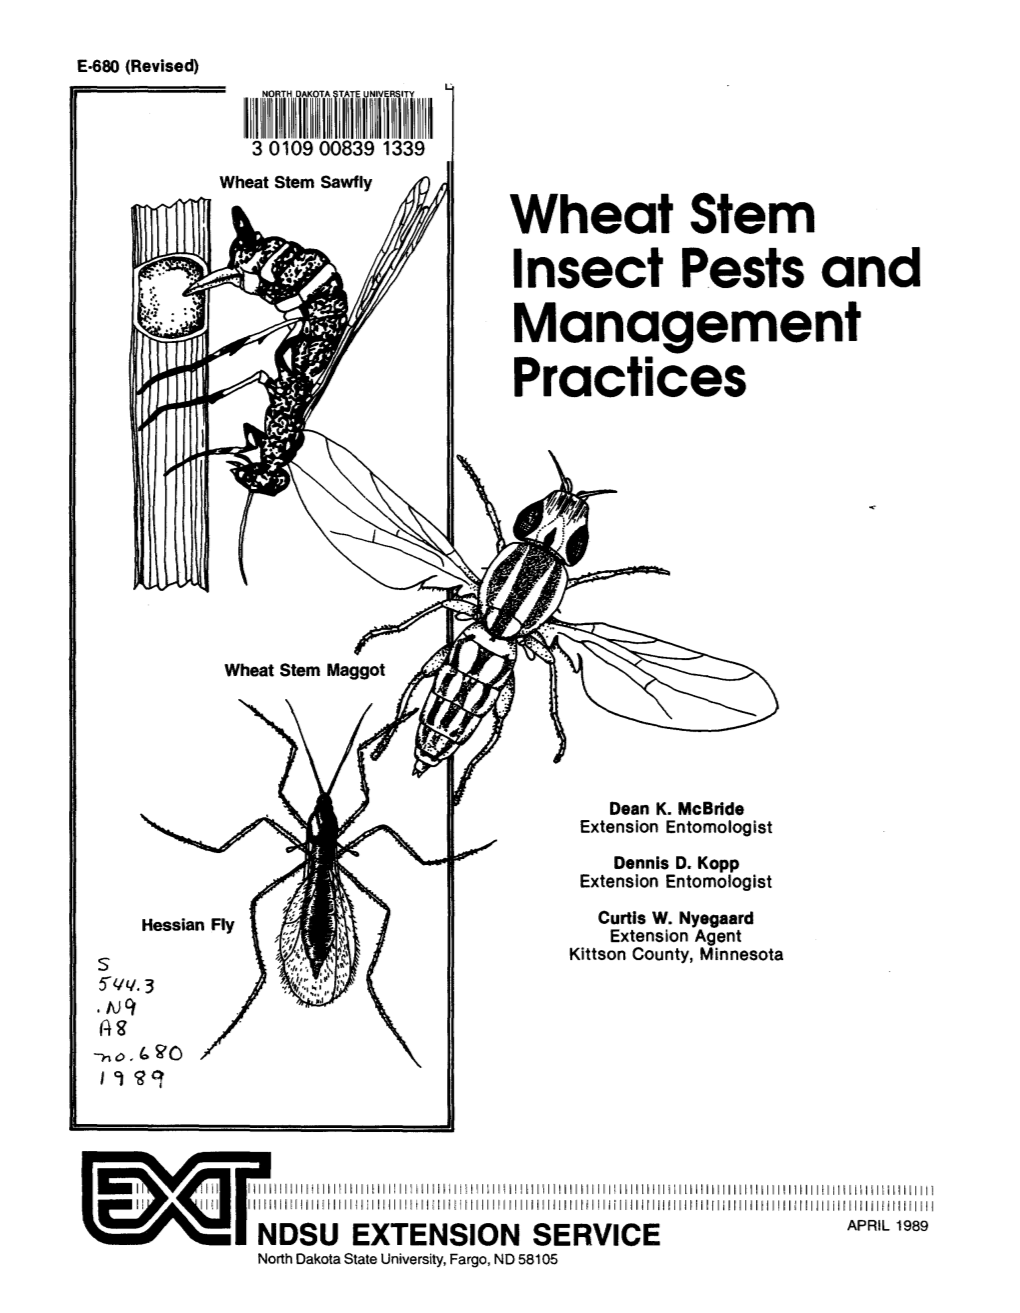 Wheat Stem Insect Pests and Management Practices